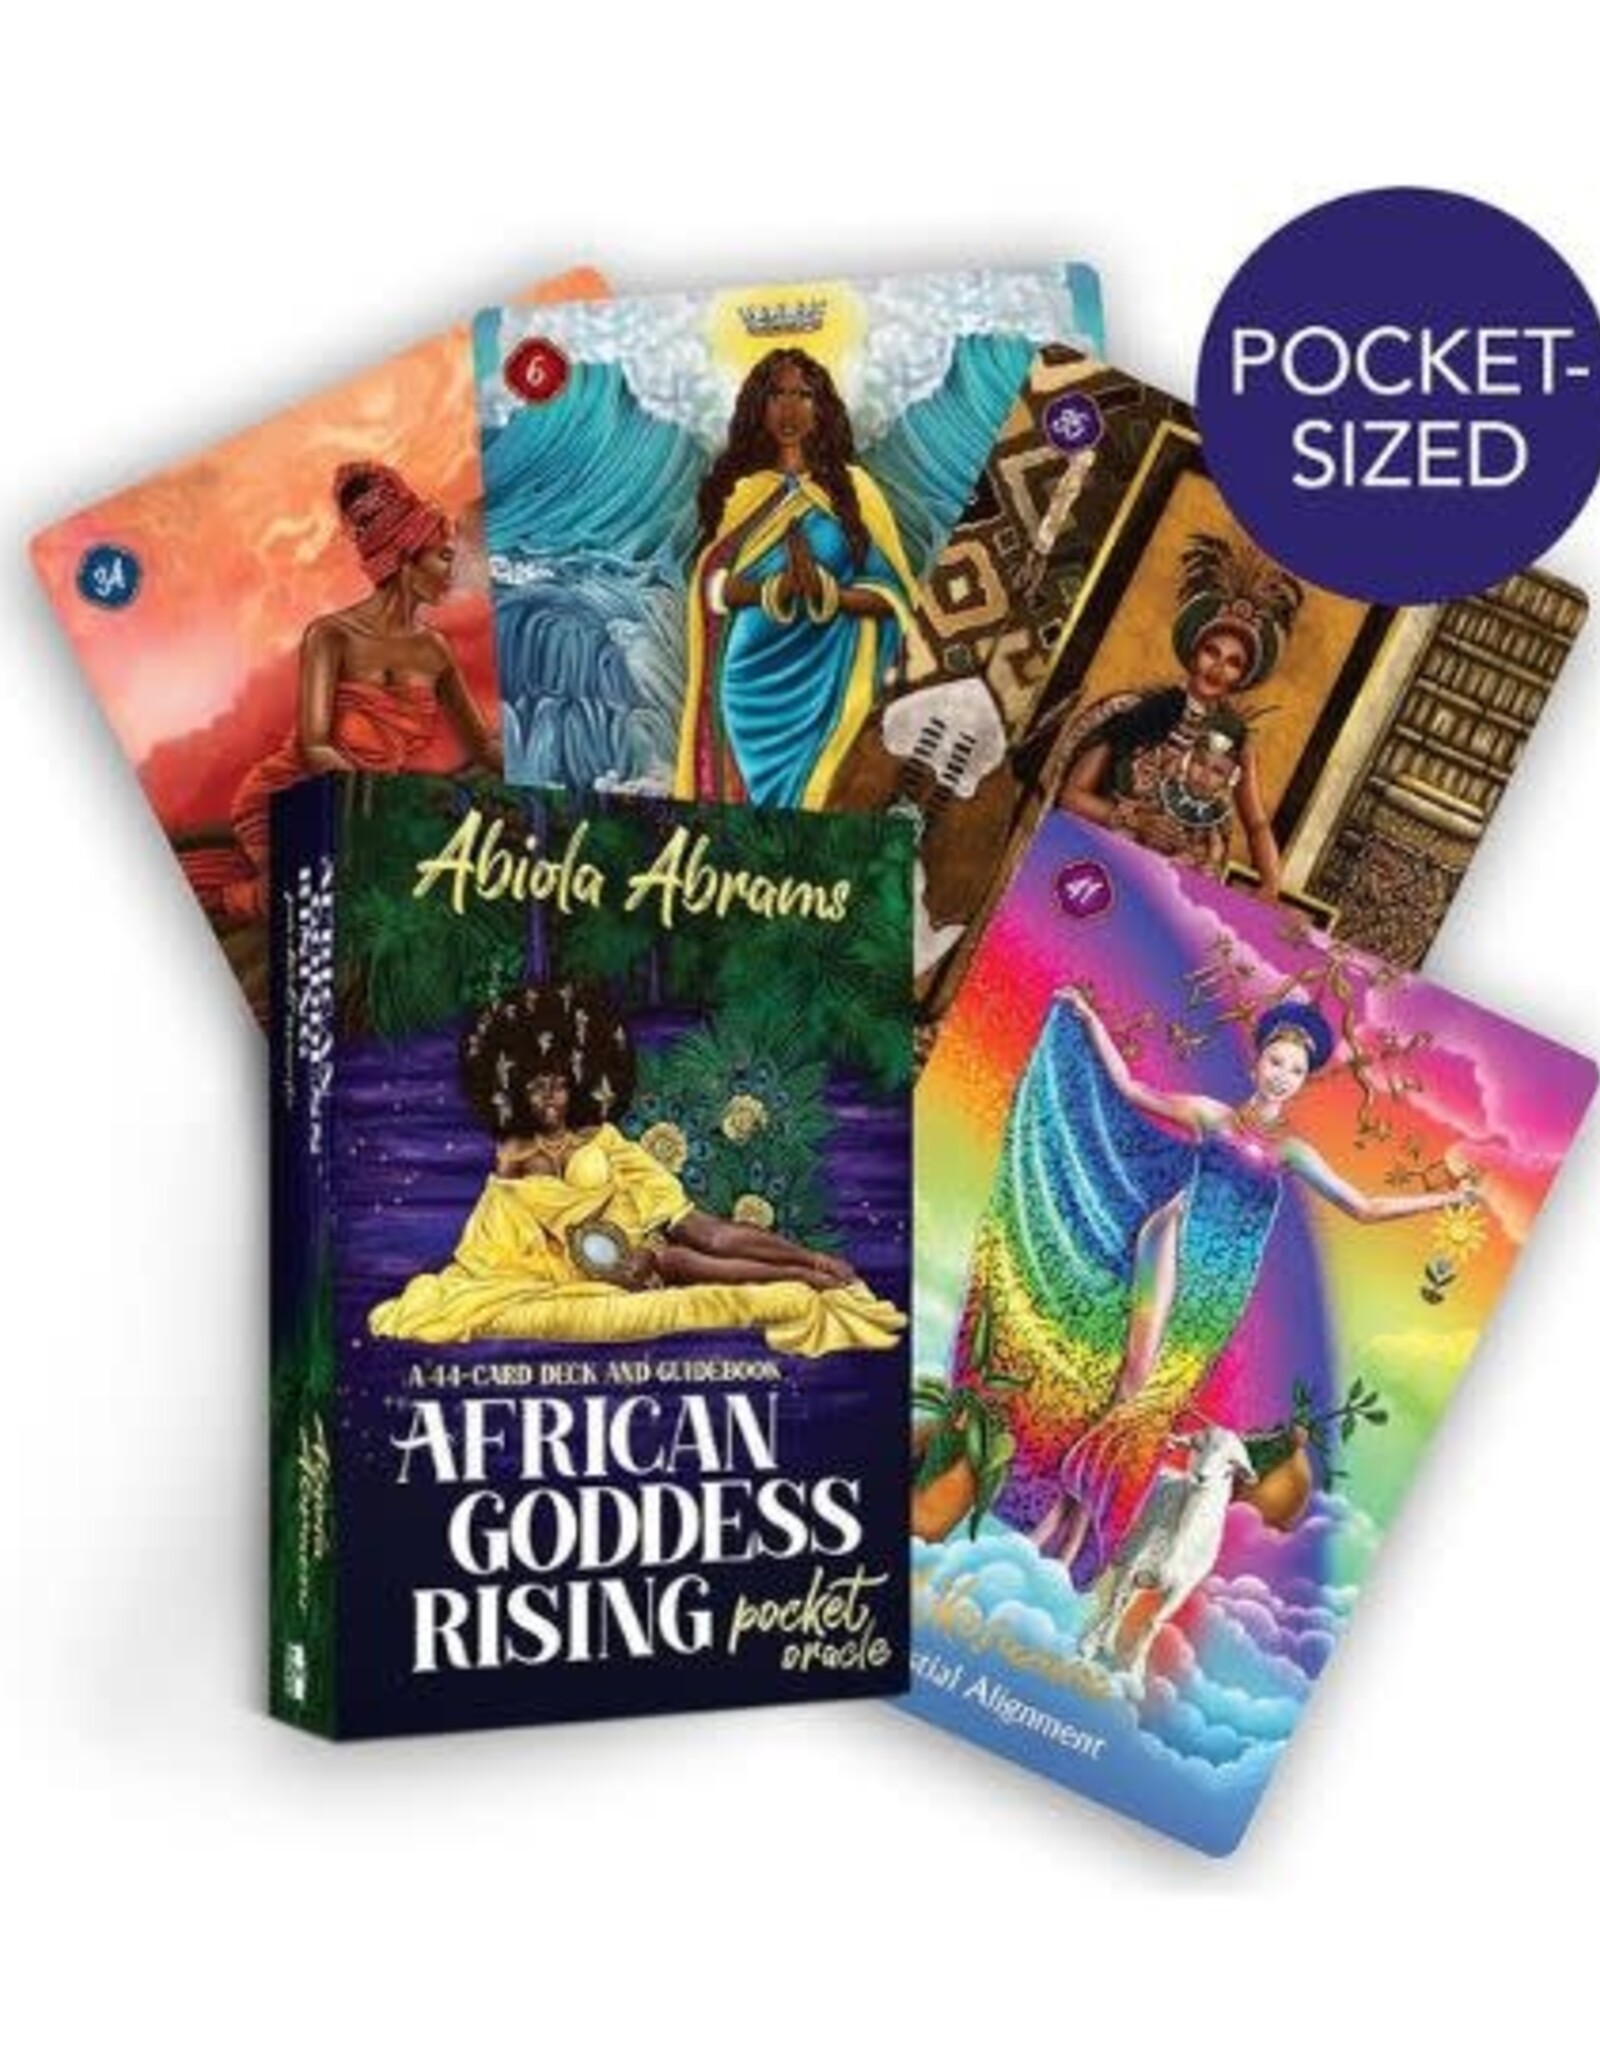 African Goddess Rising Oracle Pocket Edition